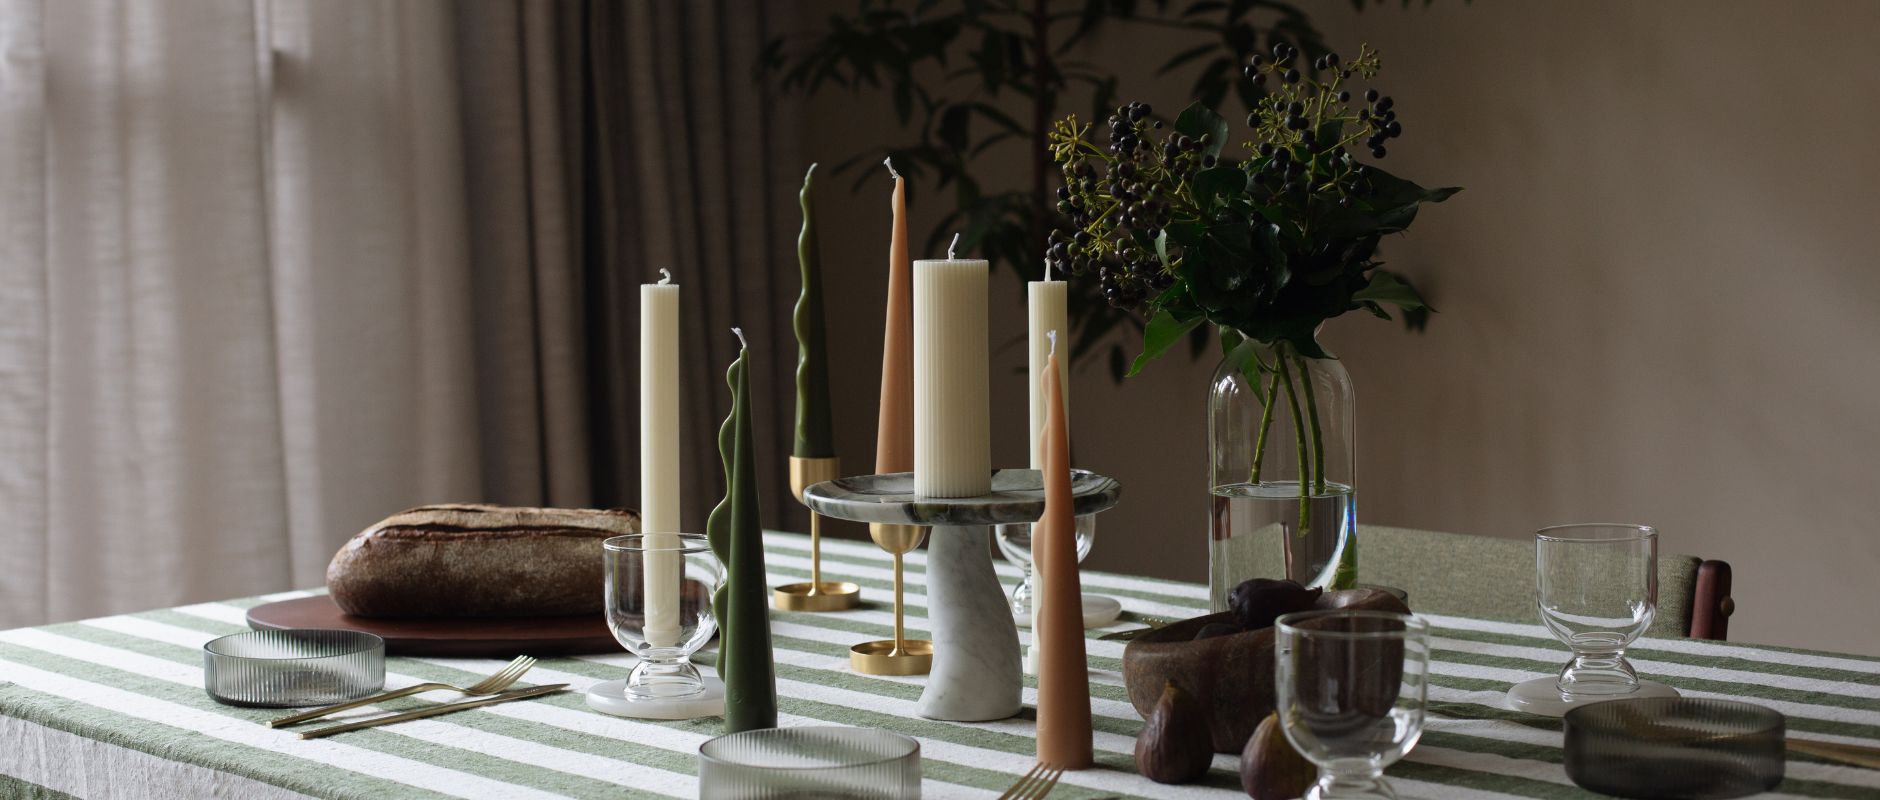 A banner showing a beautiful table setting featuring candles and home decor by Black Blaze. The table has an Oyoy tablecloth in a green and white stripe, trays, bowls and candles by Black blaze, in neutral tones of olive, toffee, and off-white. There are also sculptural glasses scattered around the table by ferm LIVING. The mood of the table setting is soft and ambient.